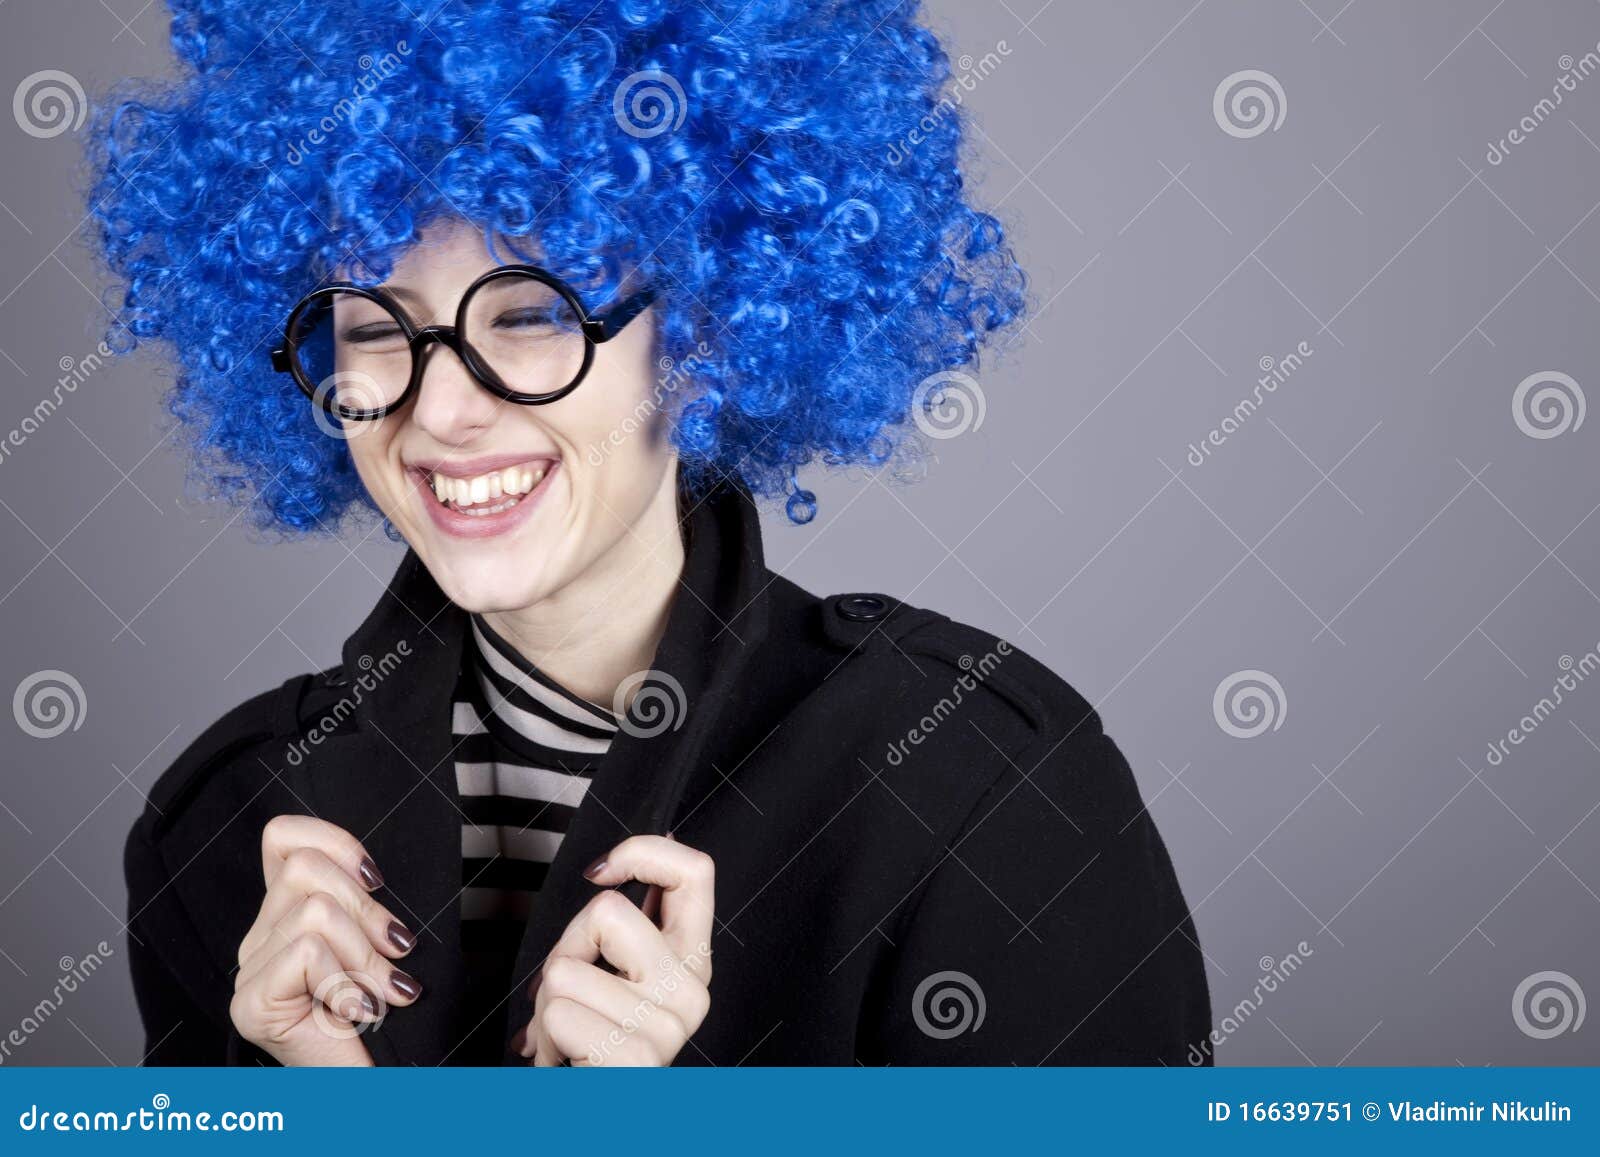 7. Teenager with dark blue hair and glasses - wide 6